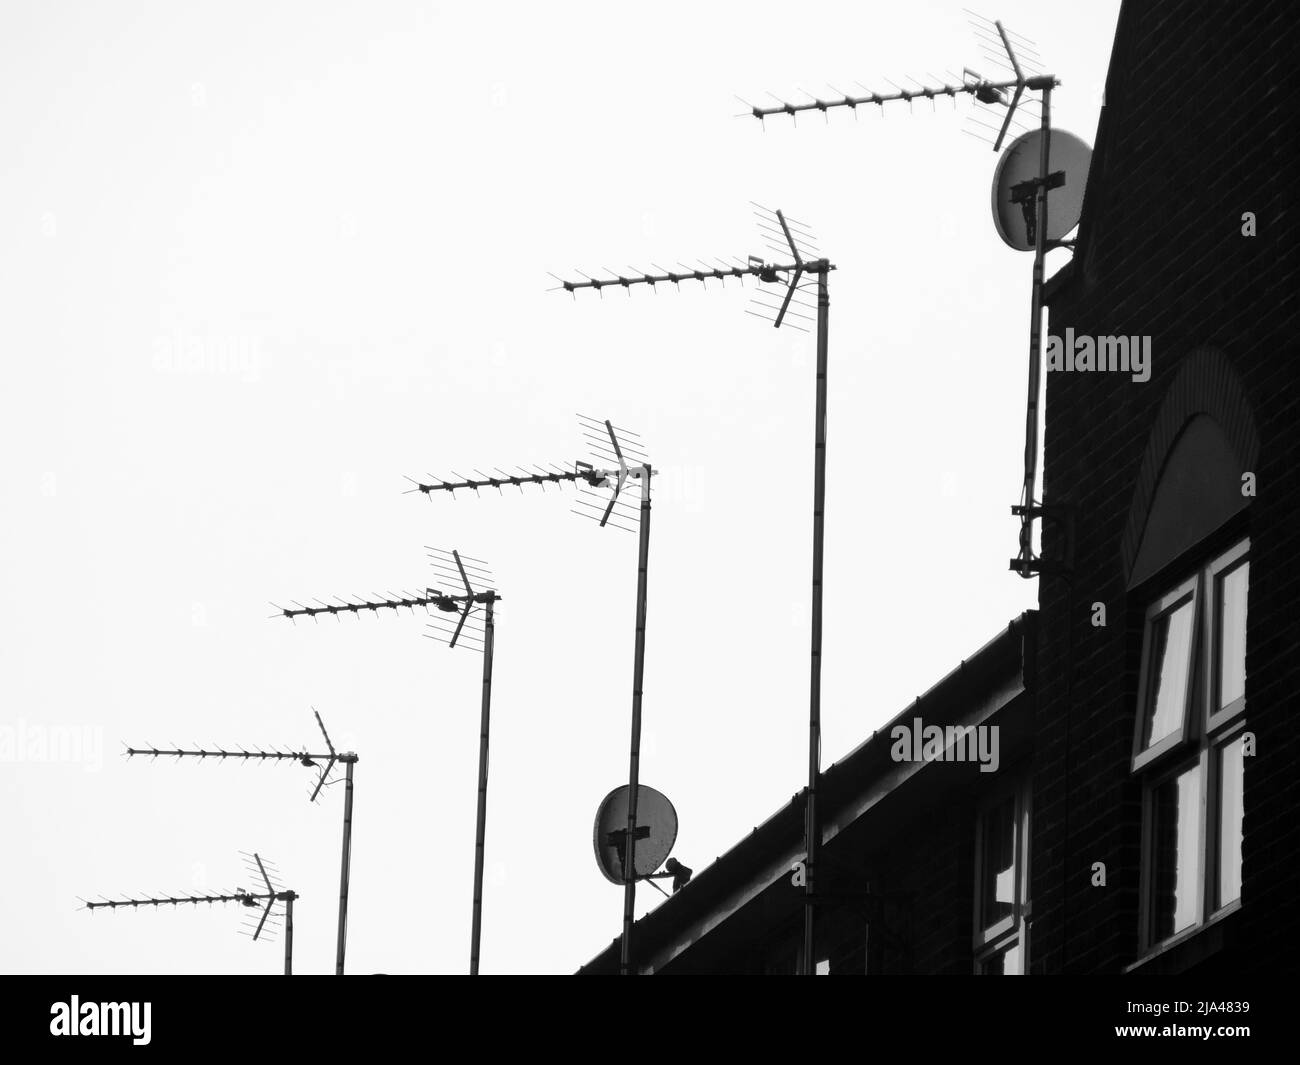 Old technologies. In an era when online streaming is increasingly dominating what and how we watch, both conventional satellite dishes and even more g Stock Photo